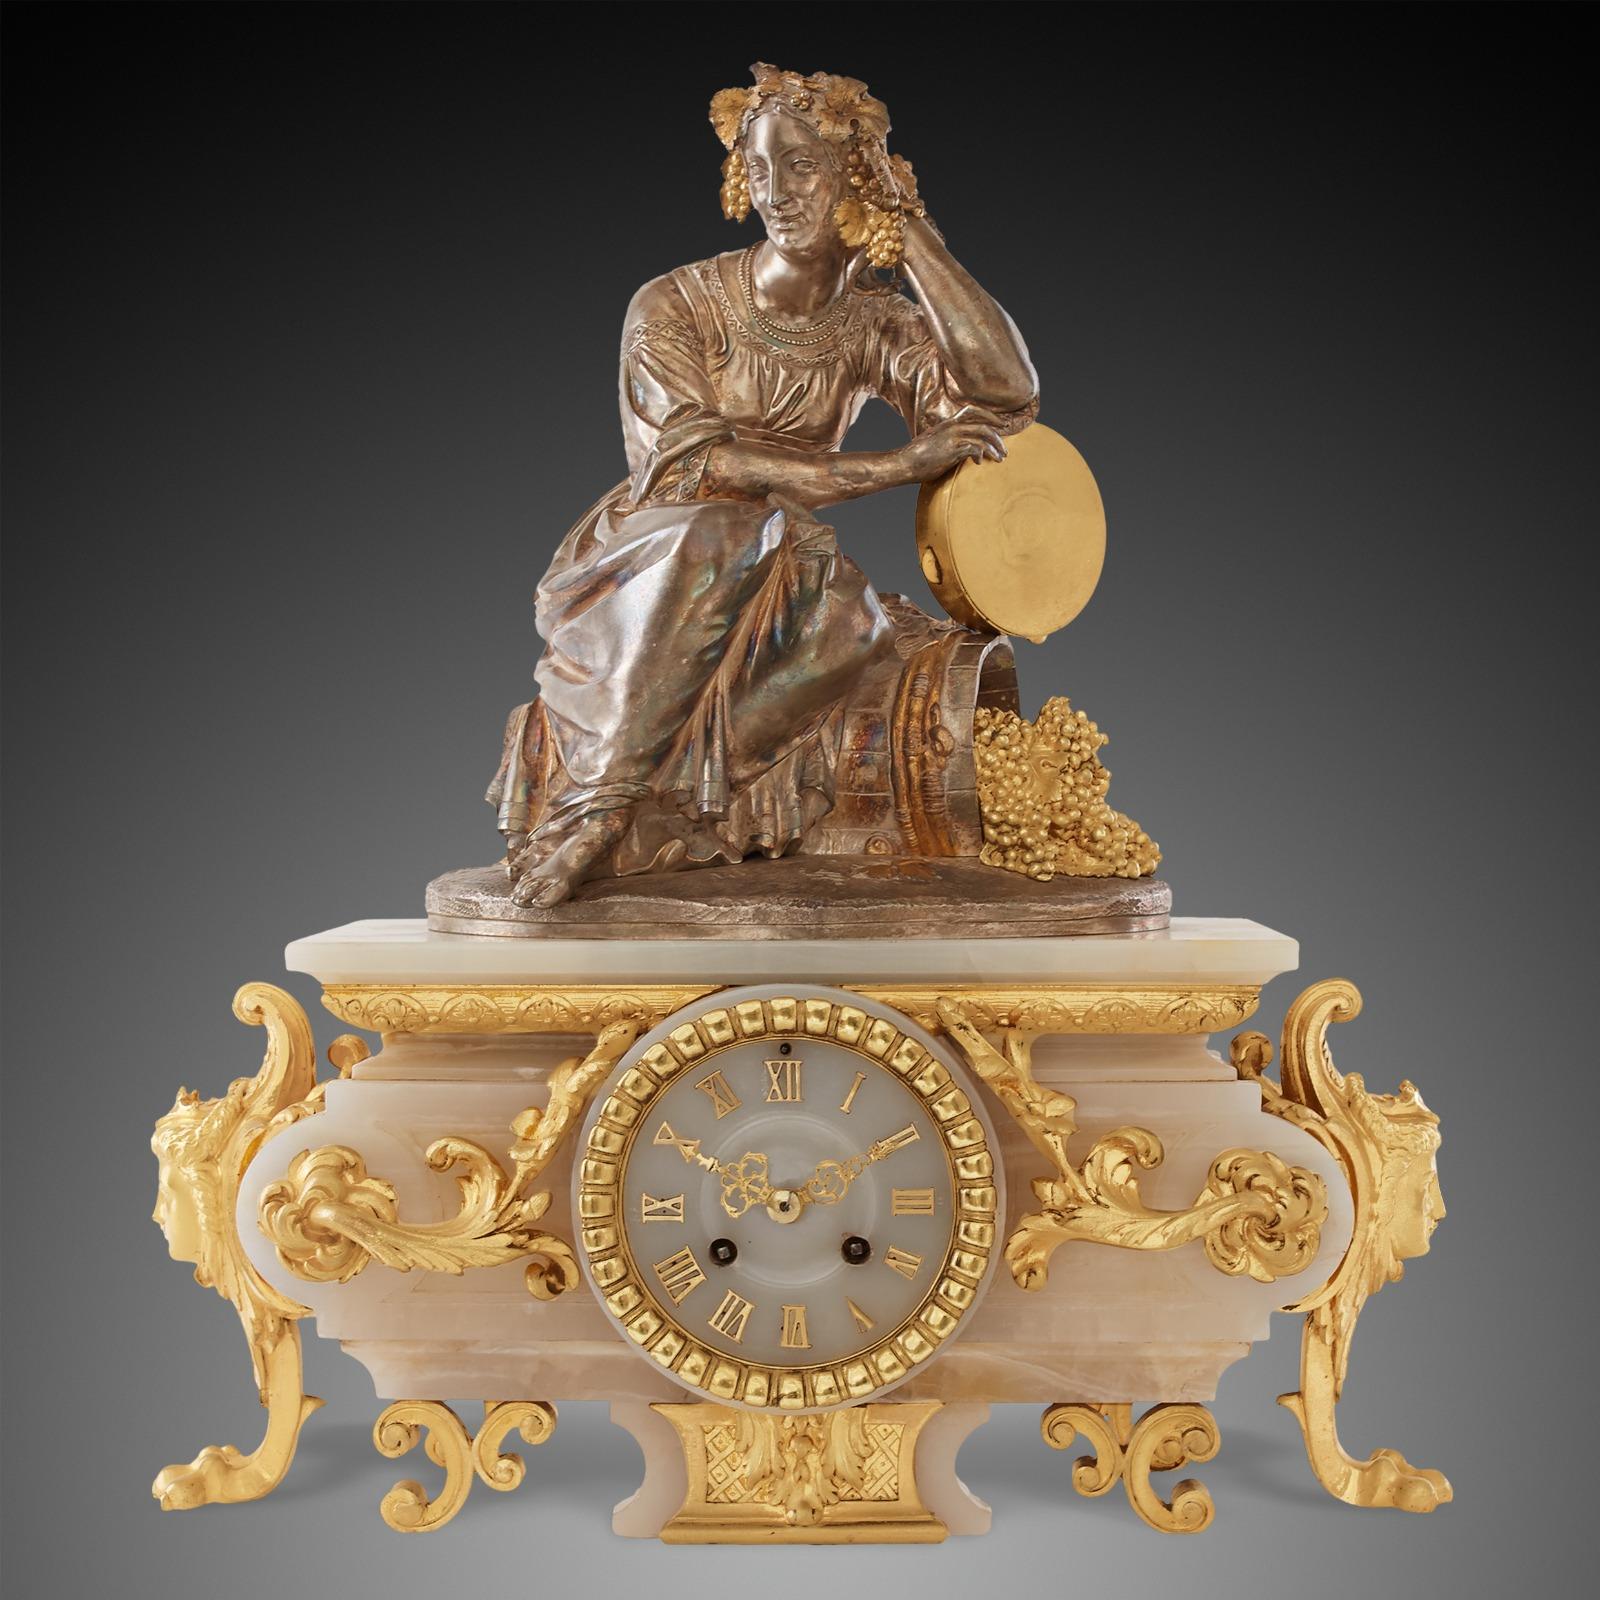 Mantel clock 18th century Louis XV by PICARD, HENRI (FRENCH, FL. 1831-1864)
Henri Picard was a prestigious 19th century fondeur and doreur, who worked in Paris between the years of 1831 and 1864. Picard was celebrated for casting and gilding